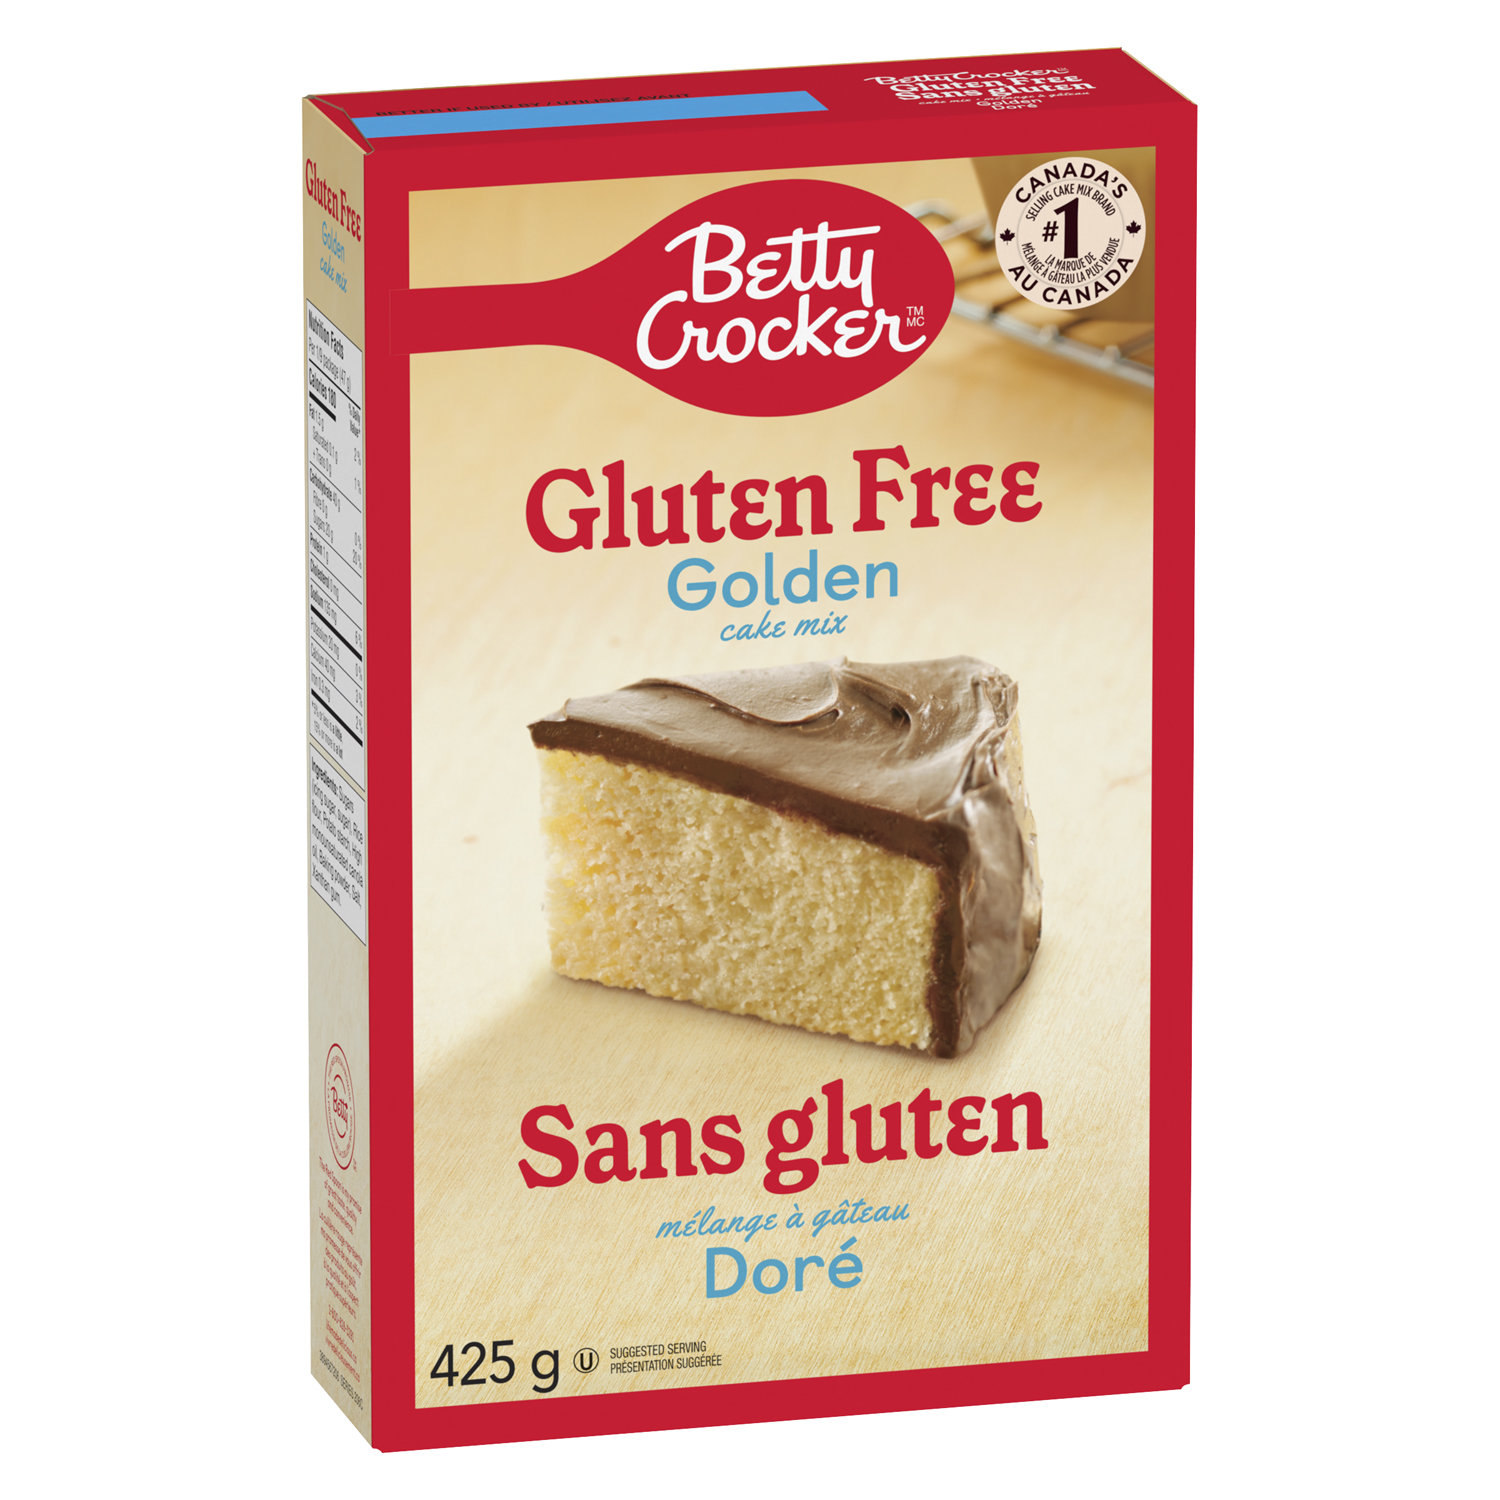 Betty Crocker French Vanilla Cake Mix Price - Buy Online at ₹306 in India